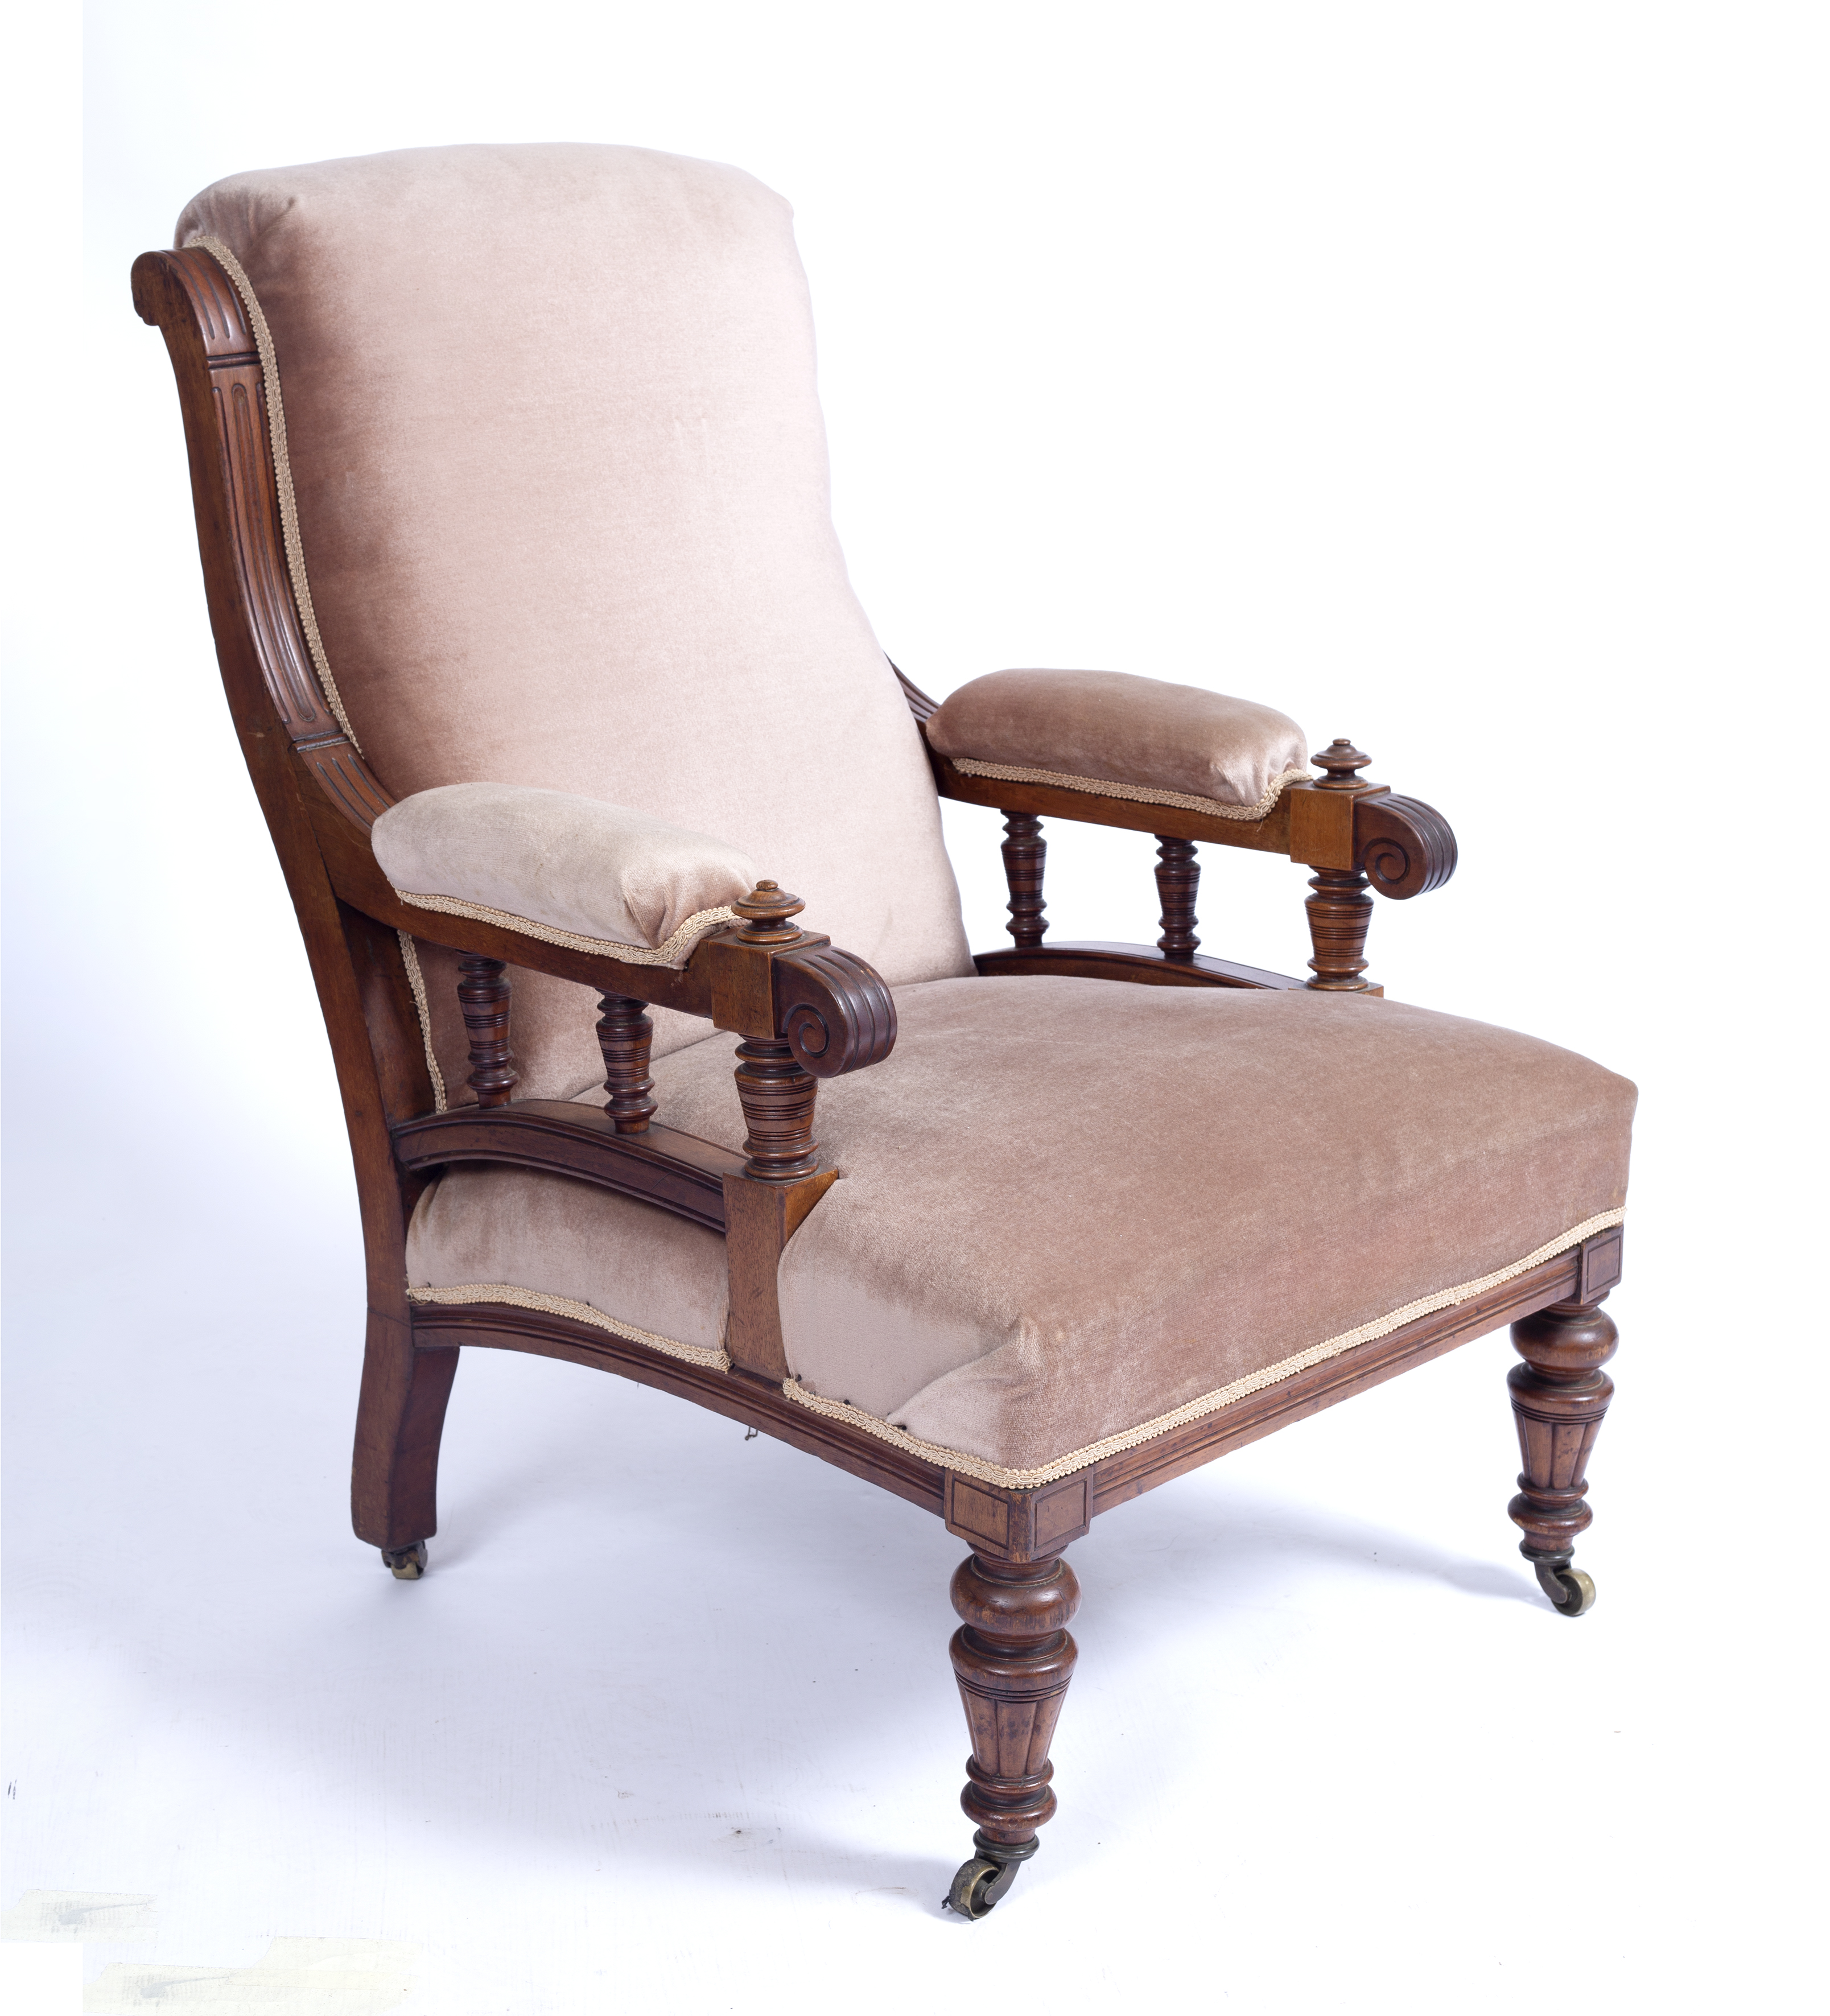 A late Victorian walnut frame armchair with turned legs and arm supports upholstered in brown - Image 2 of 2